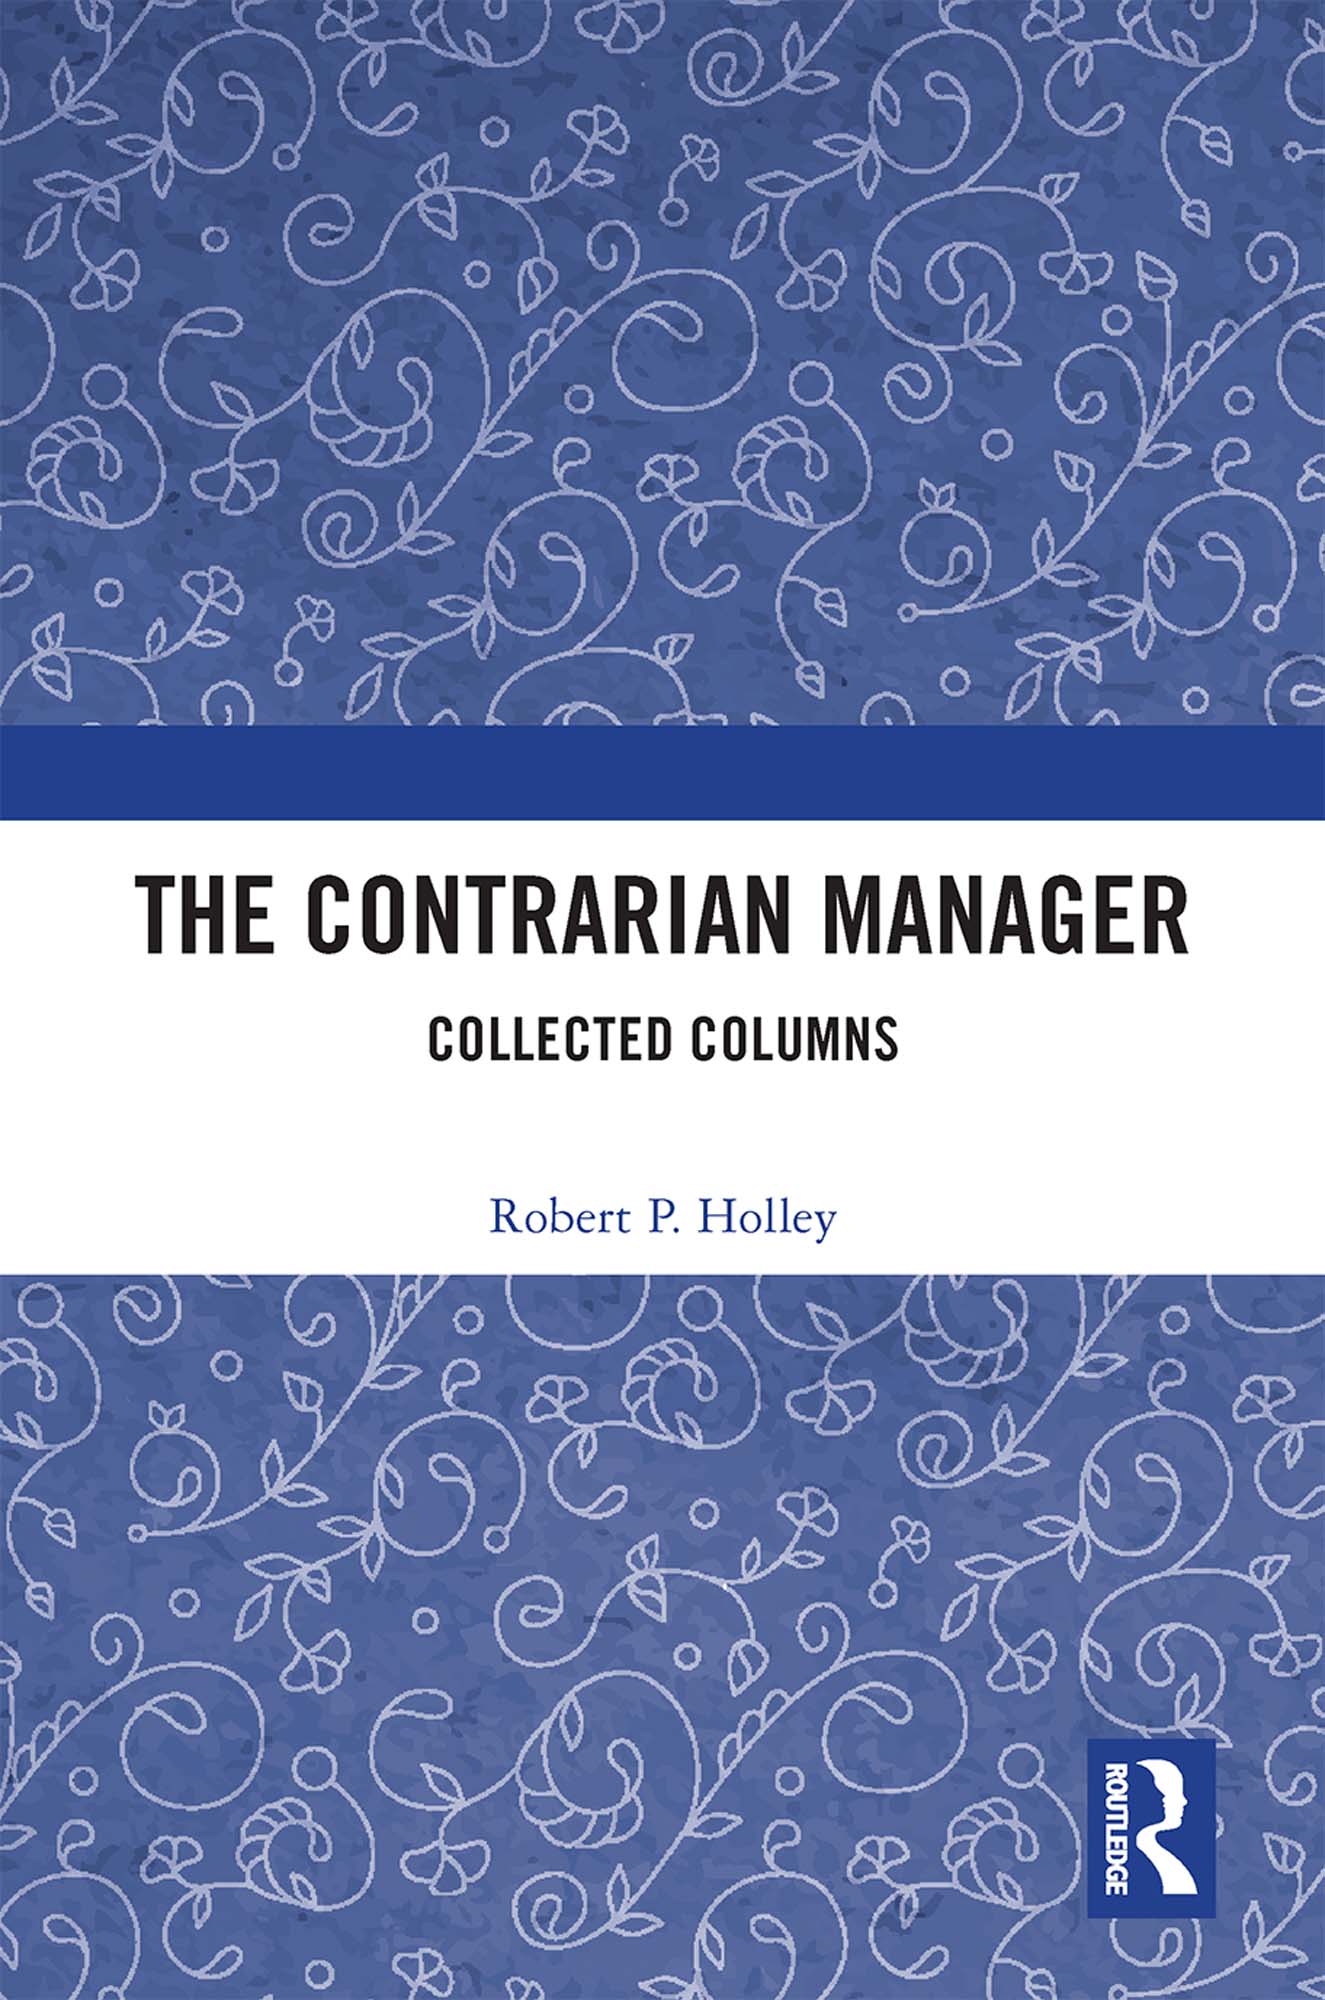 The Contrarian Manager